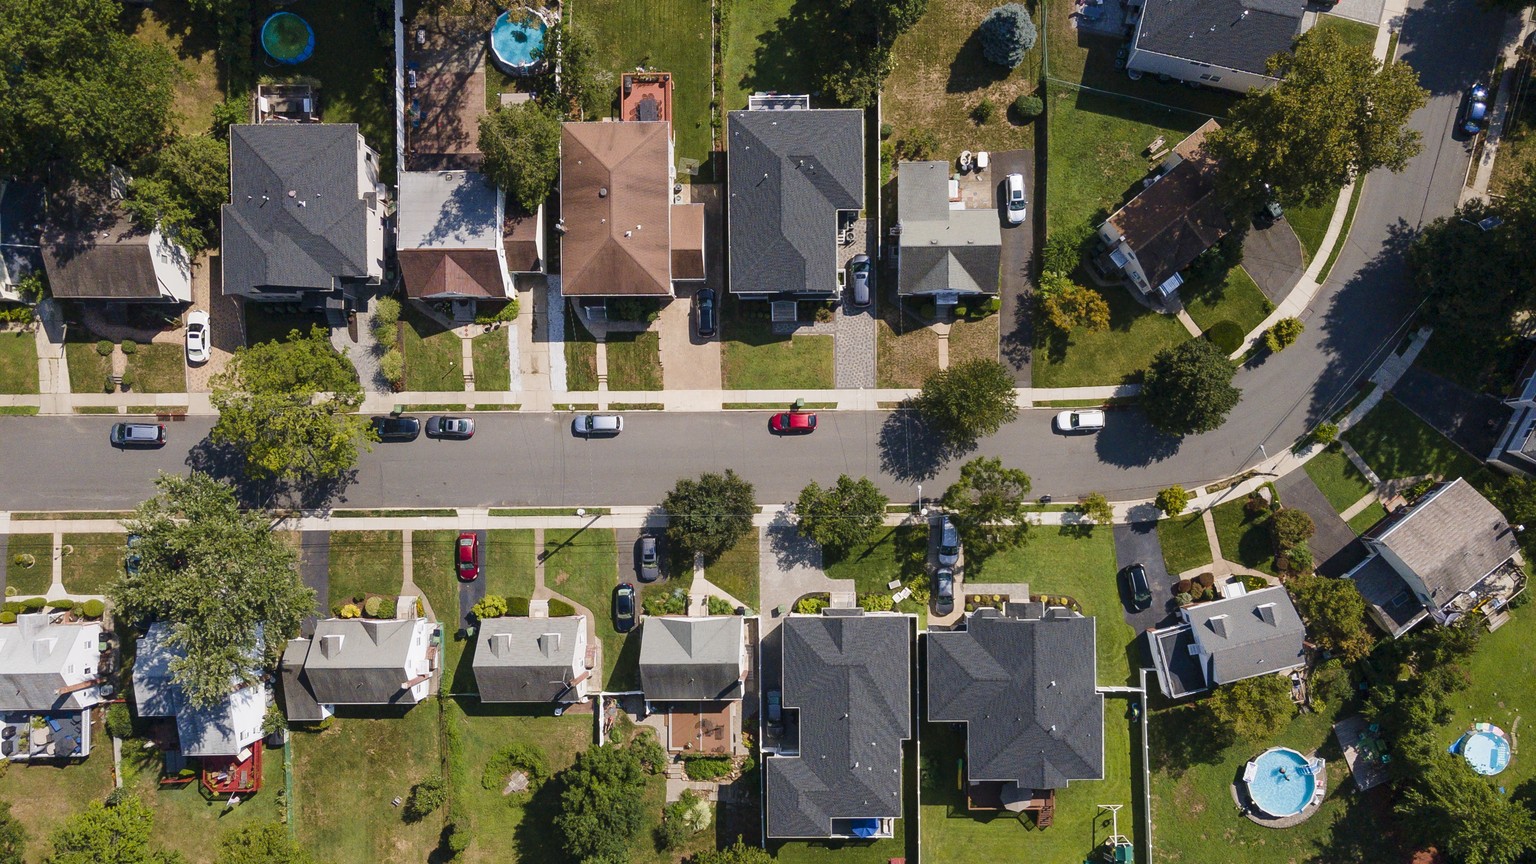 epa08633040 A photo made with a drone shows suburban houses in Paramus, New Jersey, USA, 28 August 2020. United States President Donald J. Trump has been targeting suburban voters in his re-election c ...